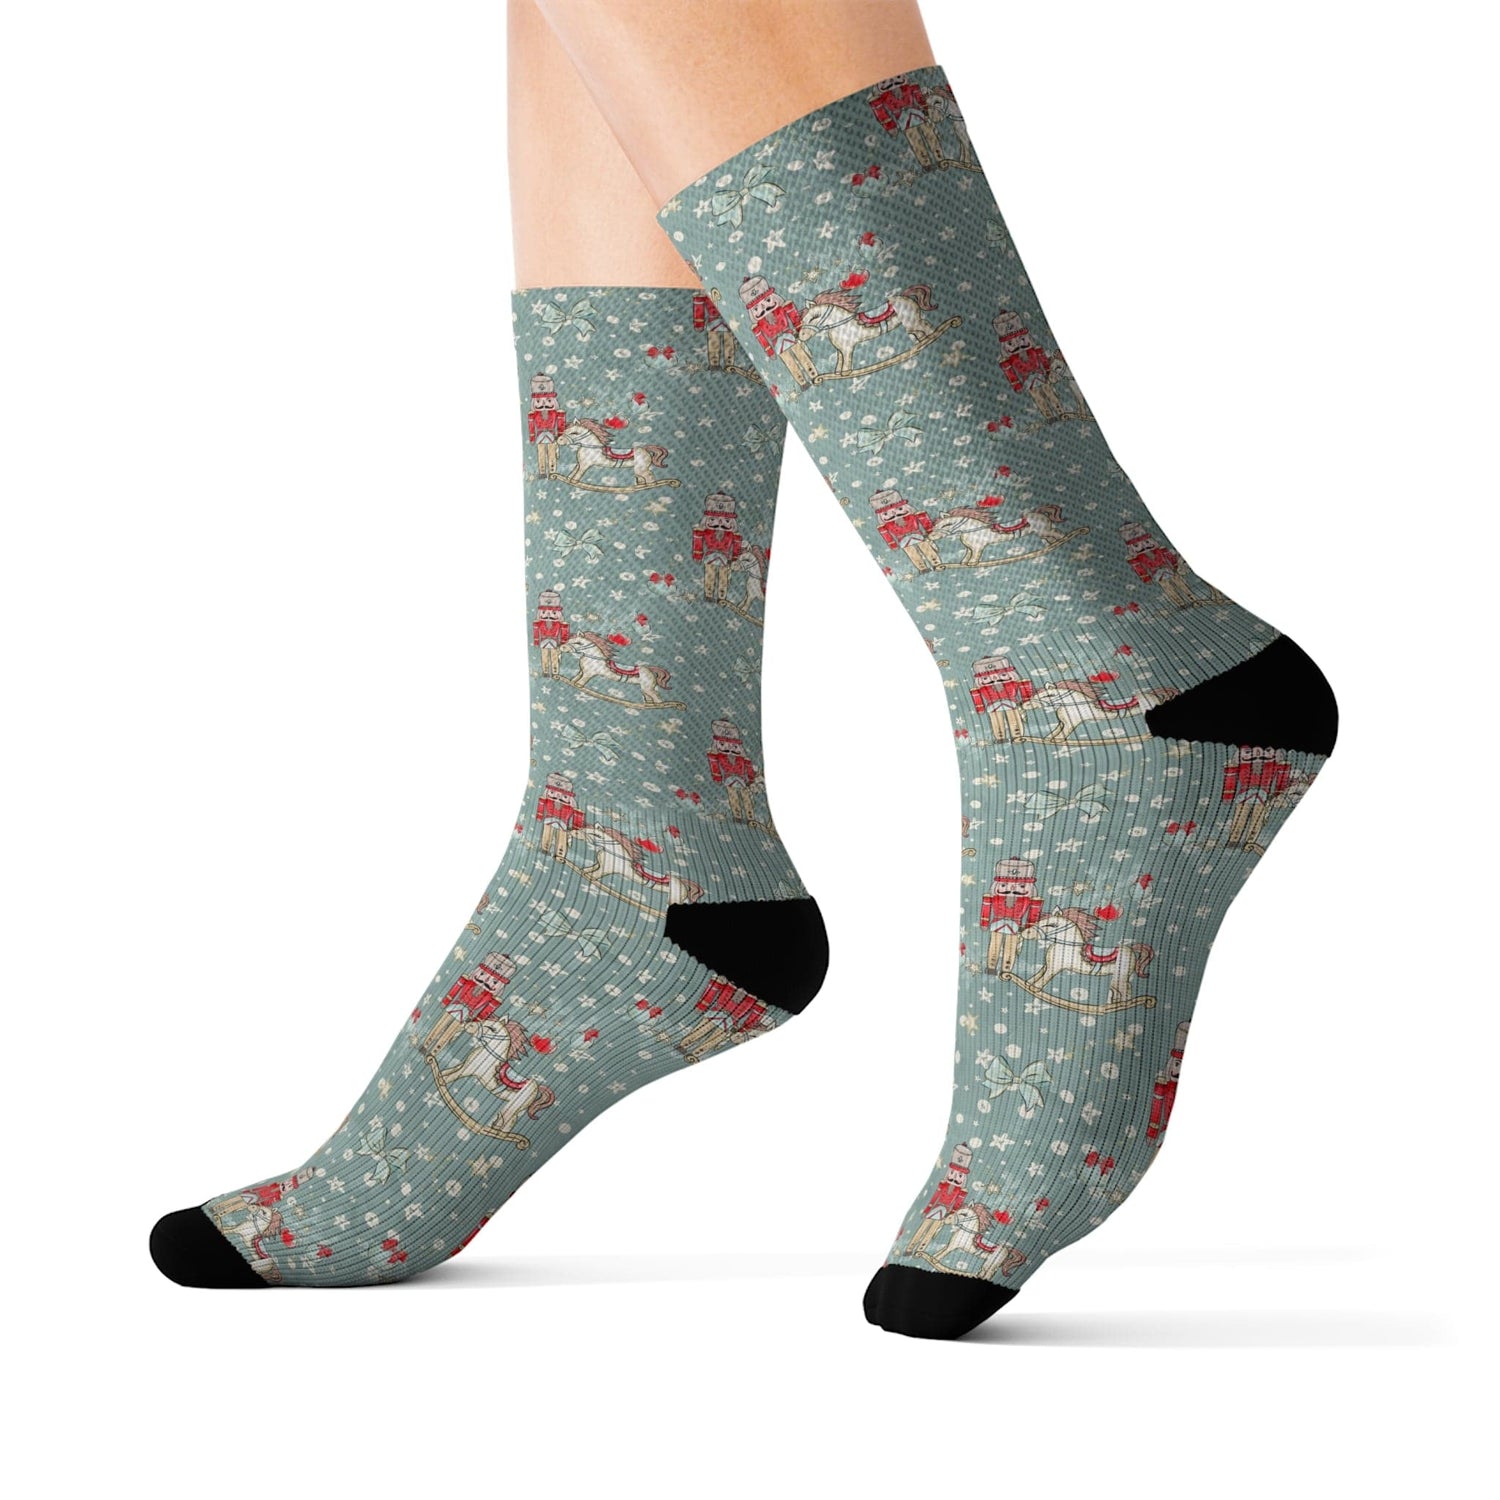 Printify Festive Nutcracker Christmas Socks: Cozy Crew Length with Fleece Lining - Perfect for Men and Women, Holiday Gifts, Stocking Stuffers All Over Prints M 14461856421070495008